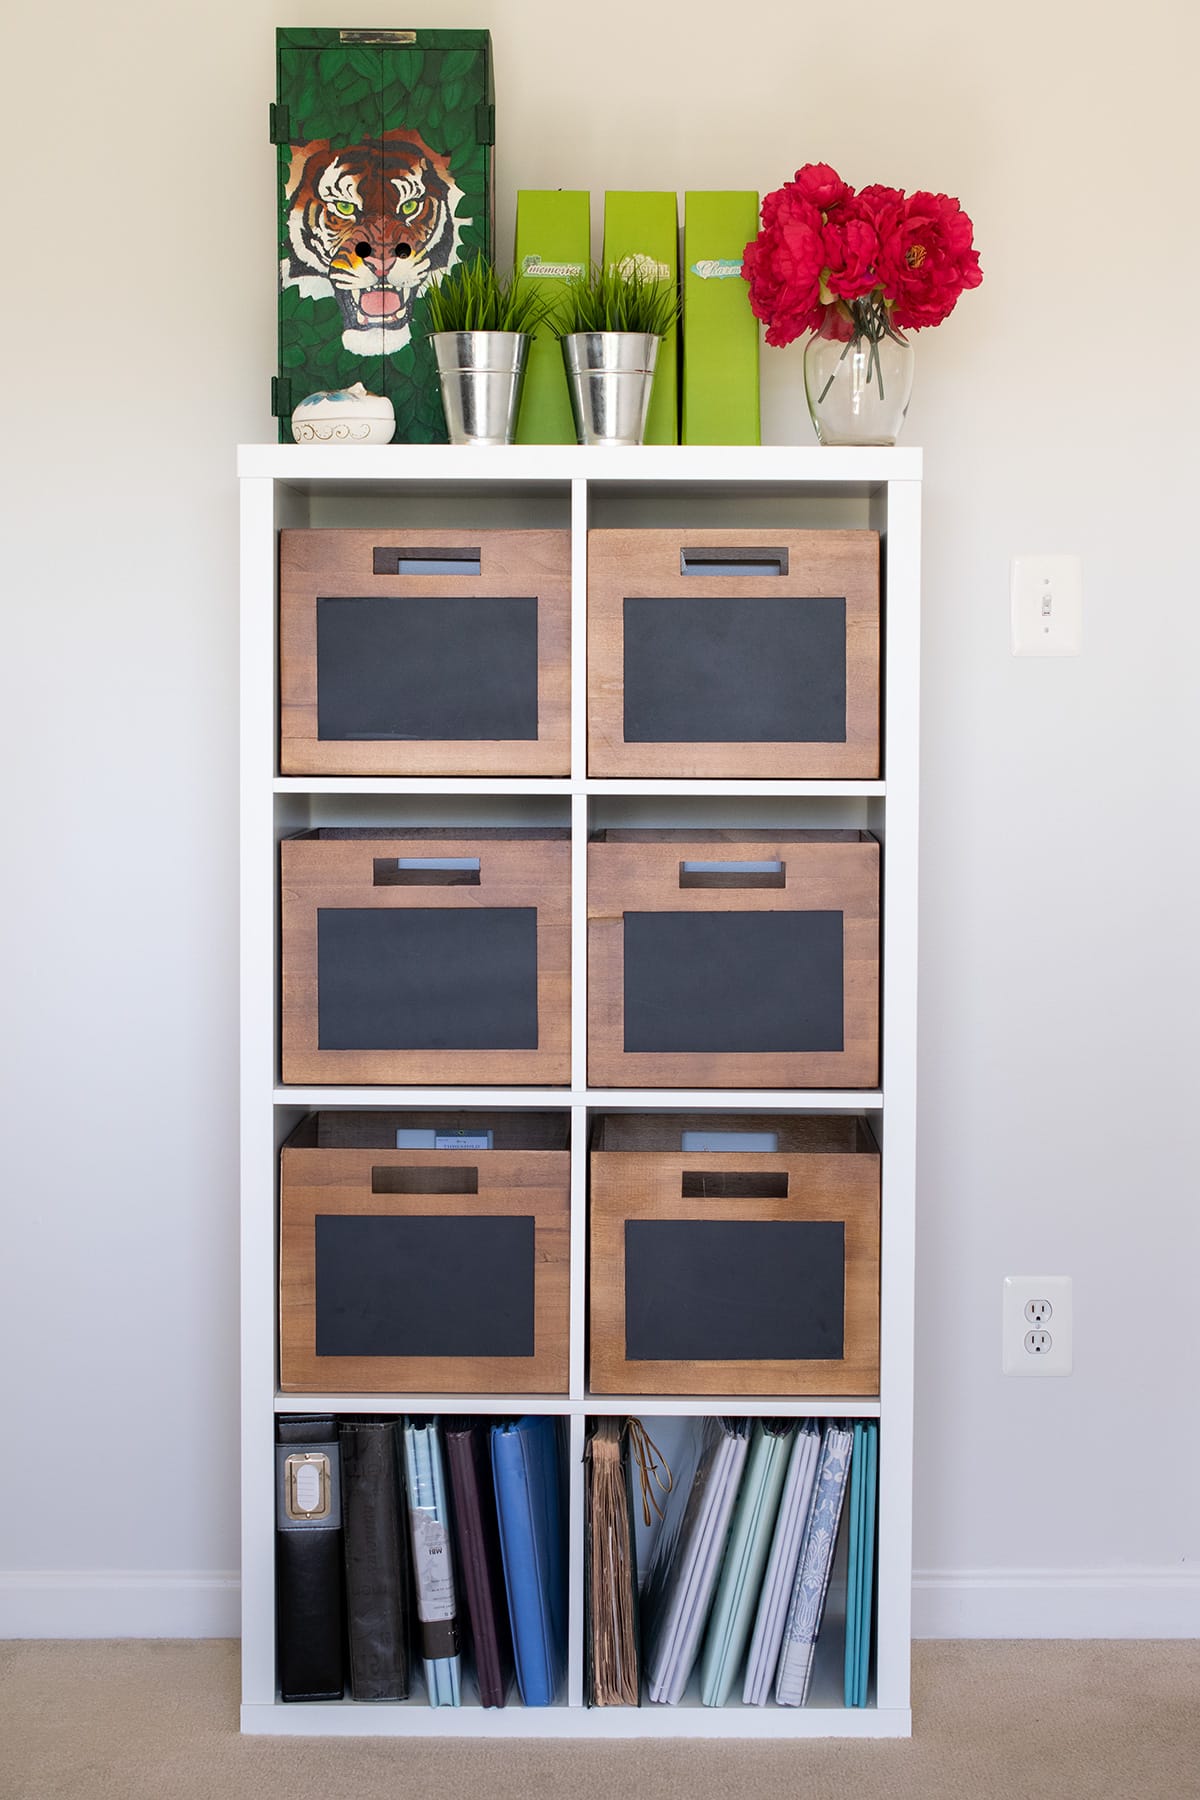 Ikea Kallax organization idea with wood storage bins with chalkboard fronts, topped with potted plants and binders. 